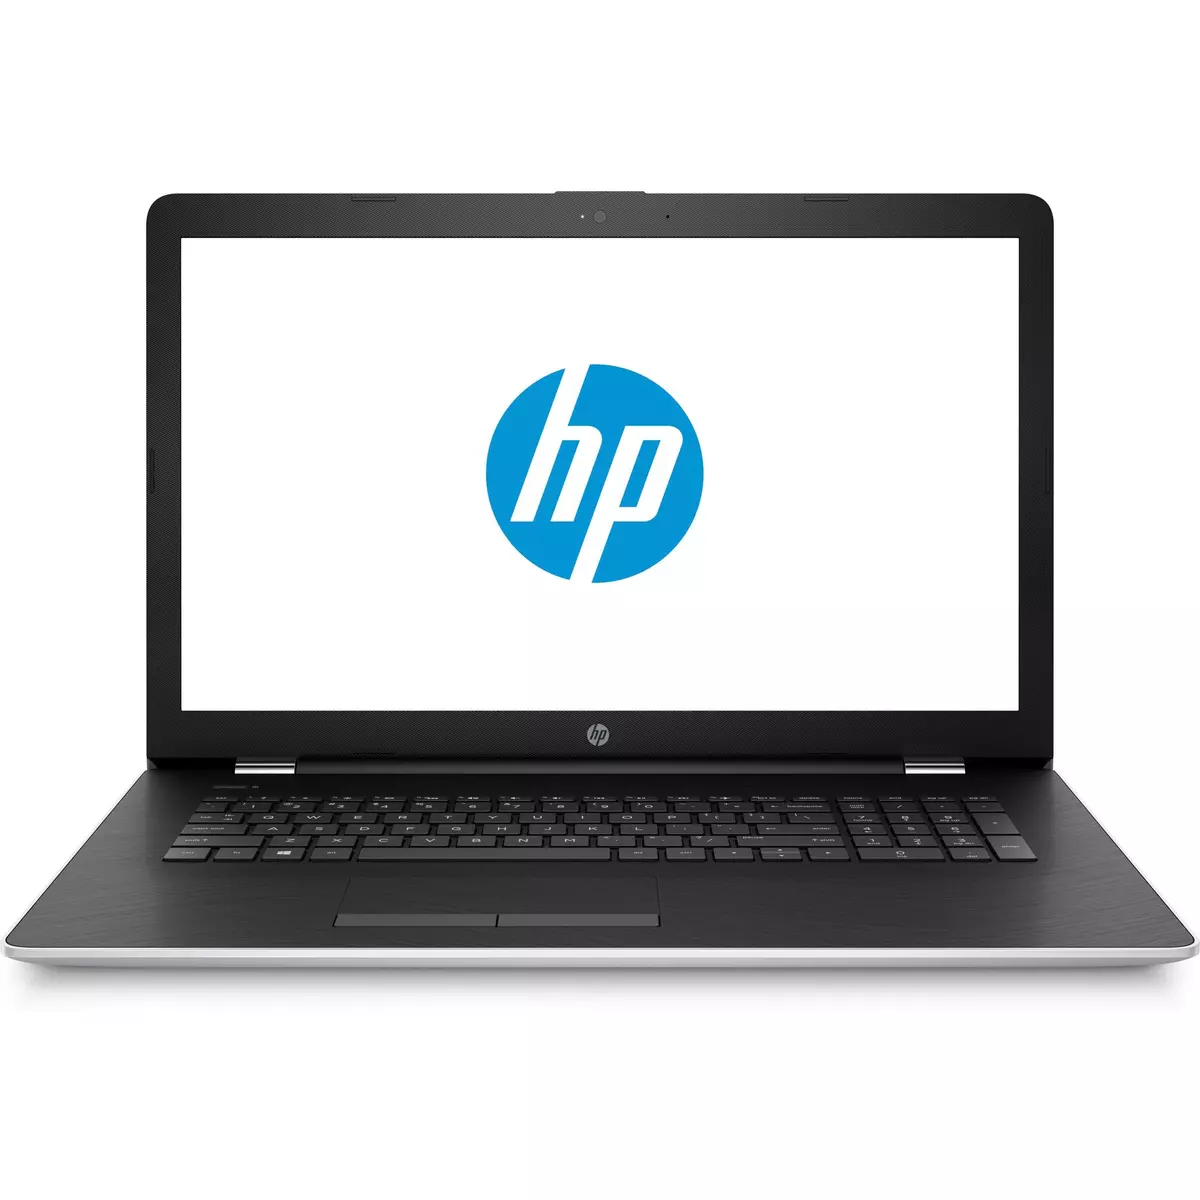 HP Ordinateur portable Notebook 17-bs017nf - 1 To - Argent